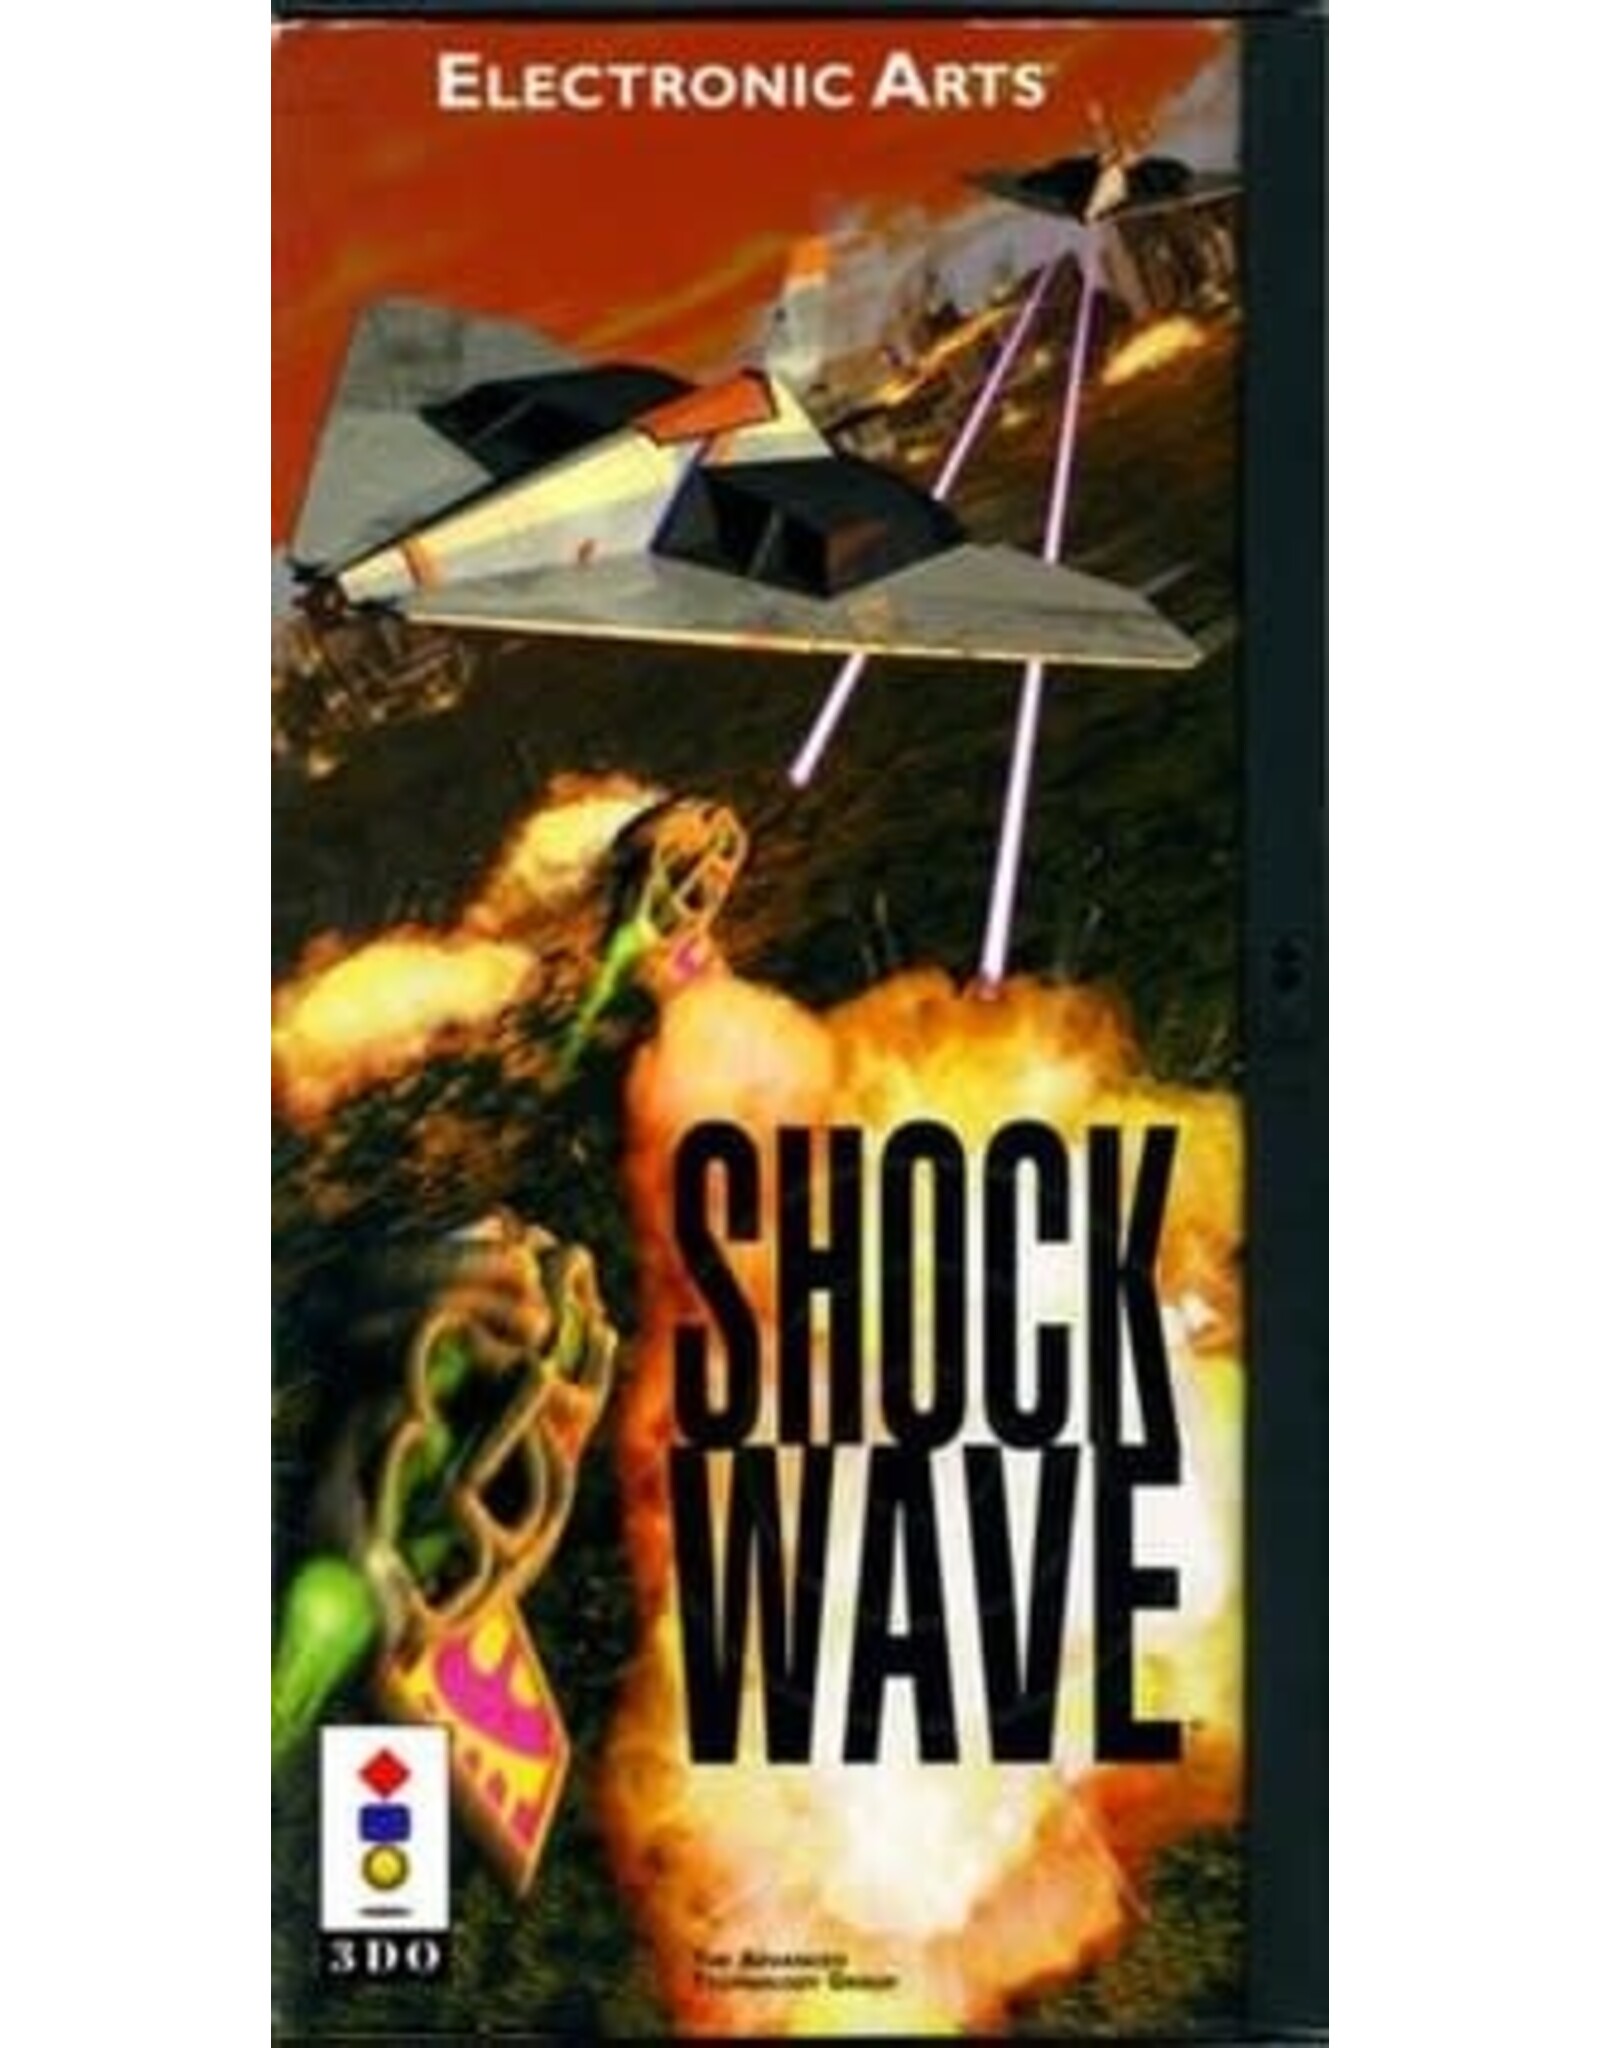 Panasonic 3DO Shock Wave (Disc Only)